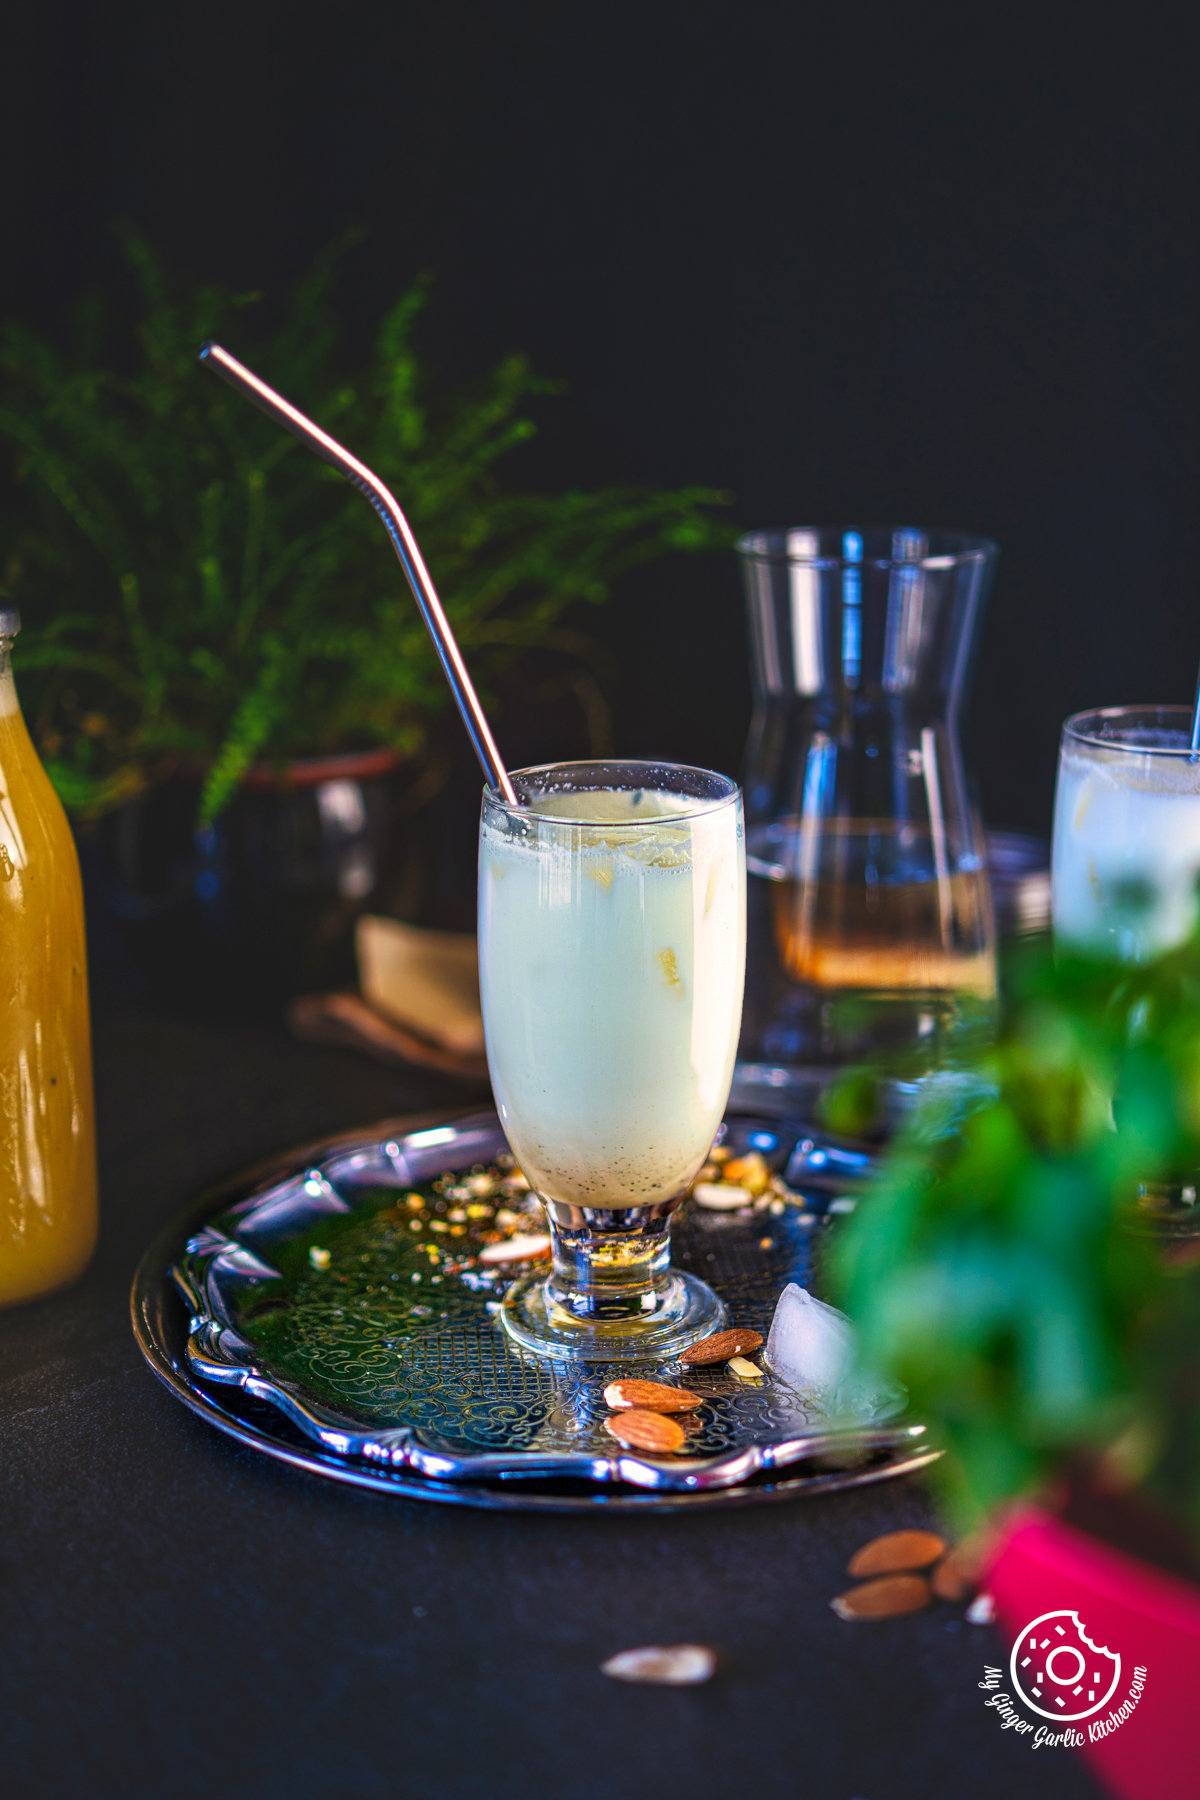 photo of a glass of badam ka sharbat on a tray with a straw and a plant in the background